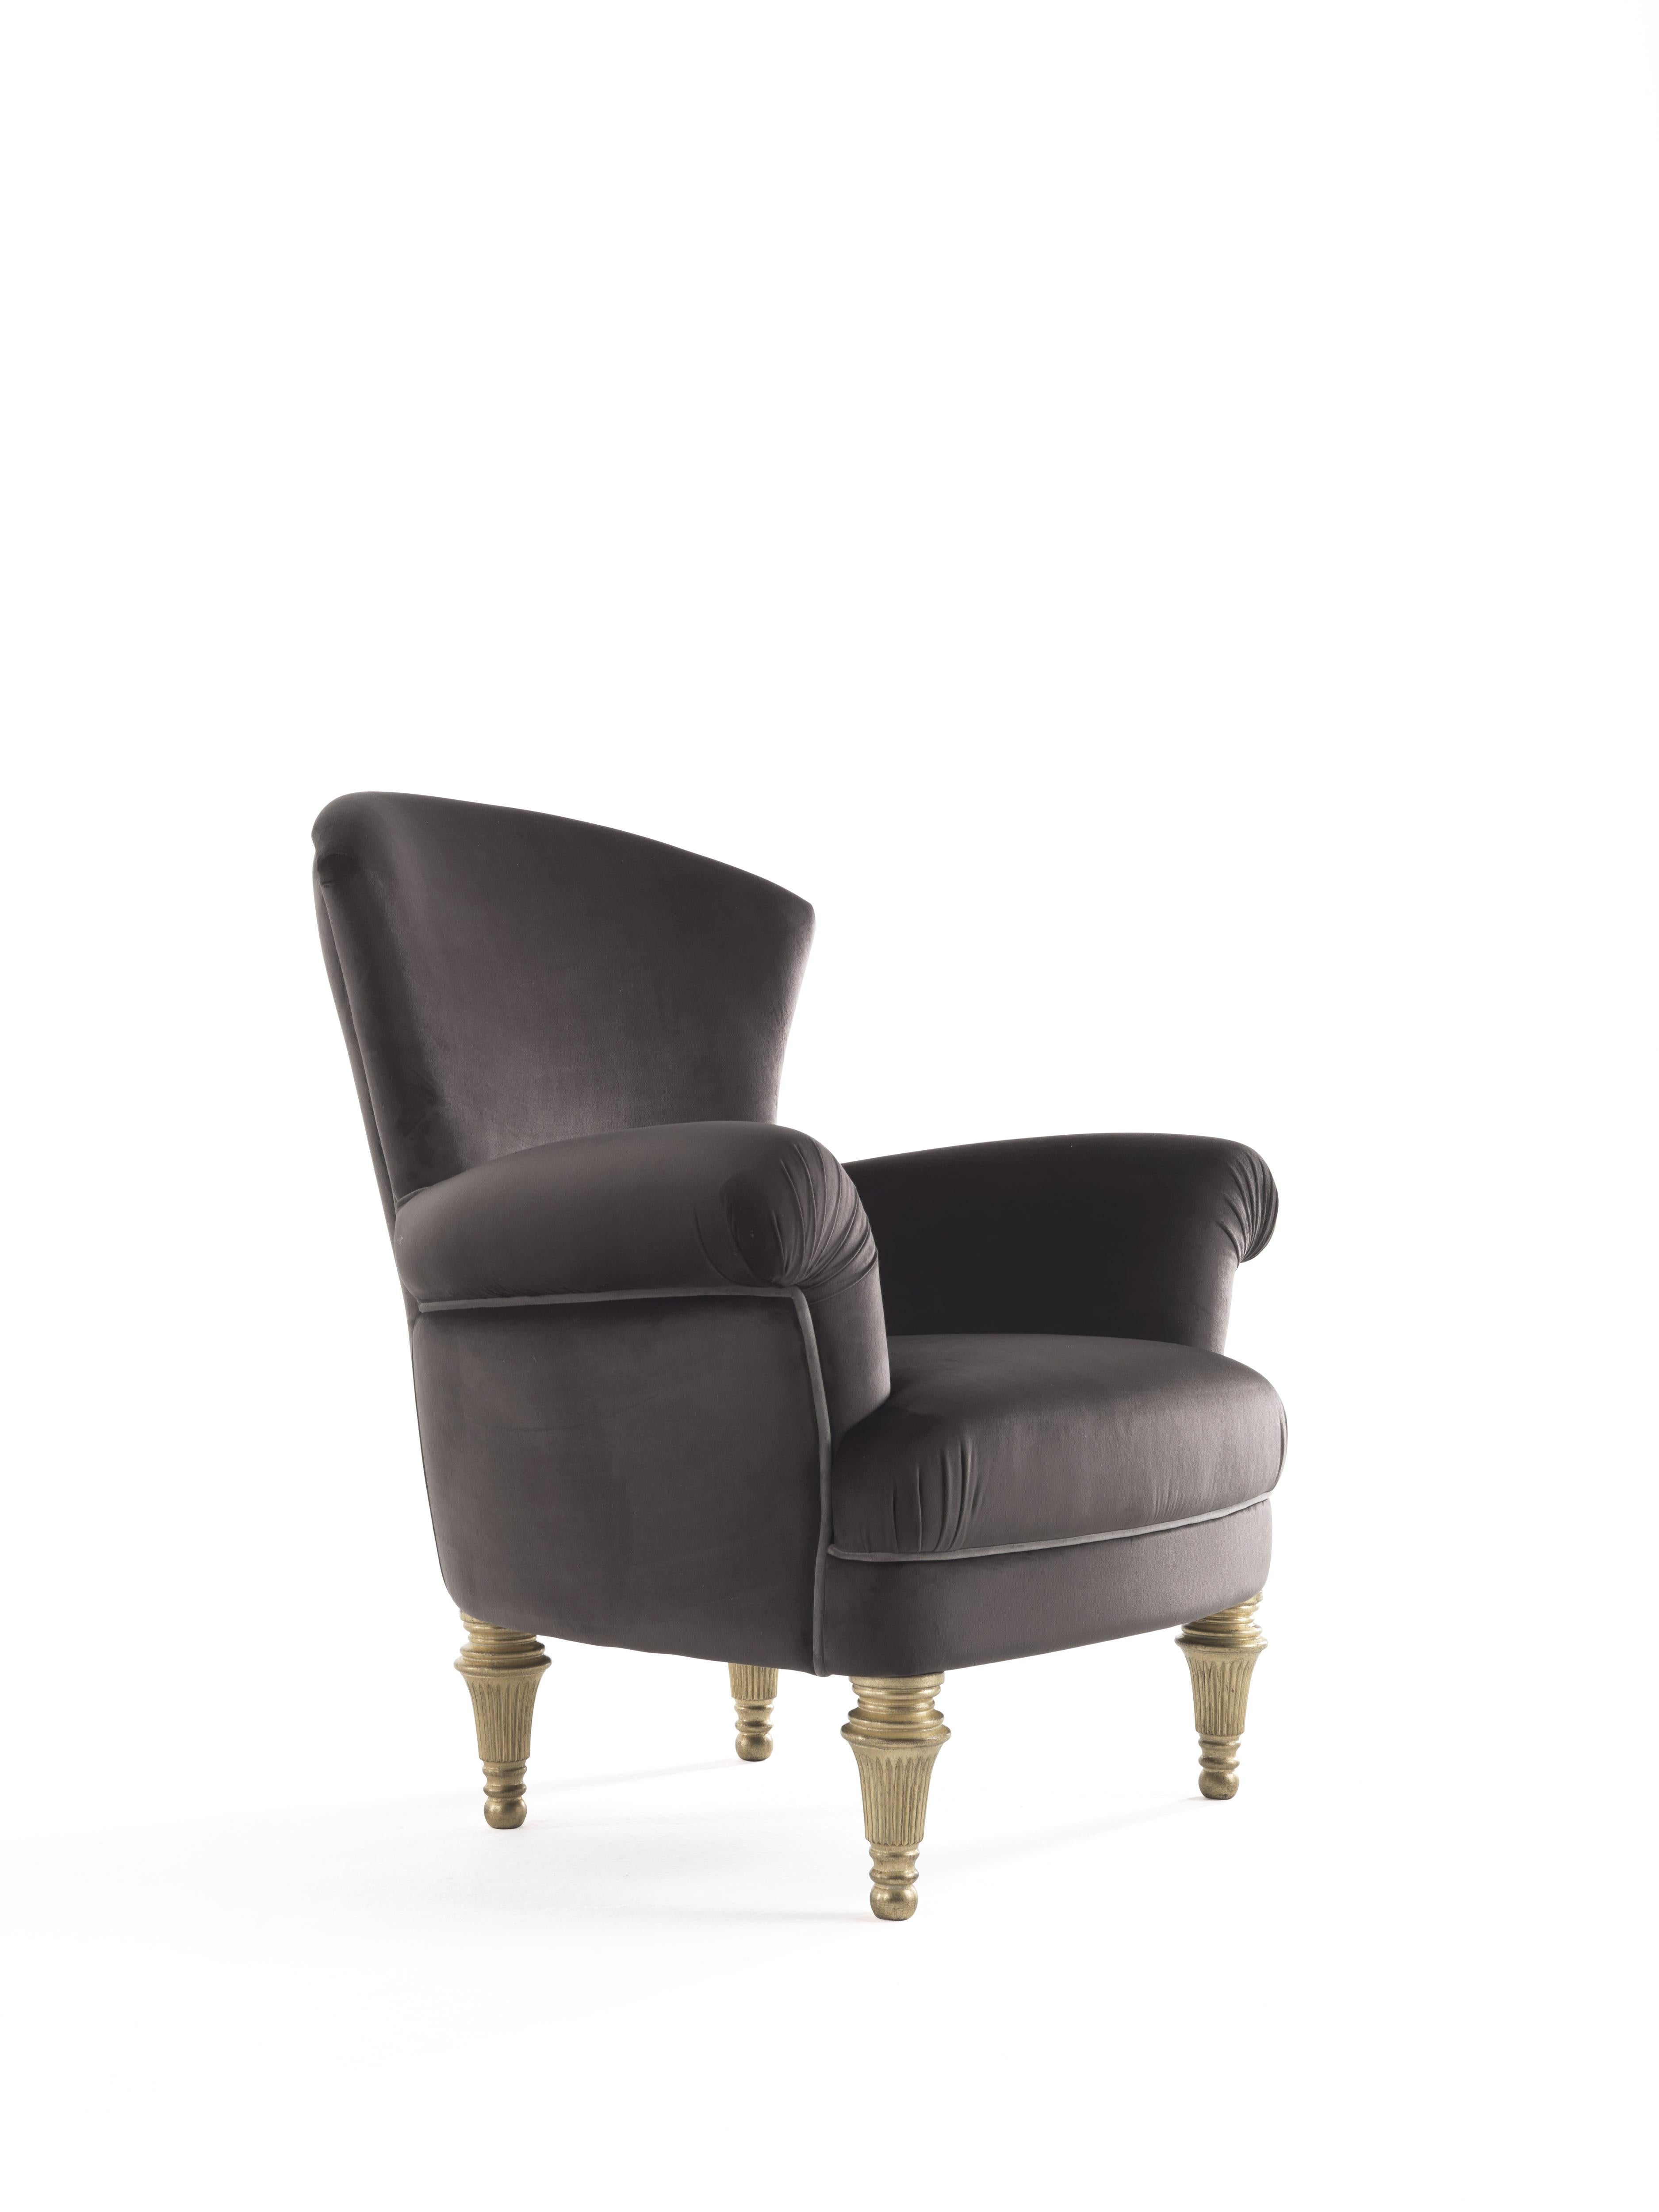 In the Rivoli collection, the sumptuous velvet upholstery and the gold leaf finish legs help to create a luminous and refined piece of furnishing that perfectly expresses the concept of 